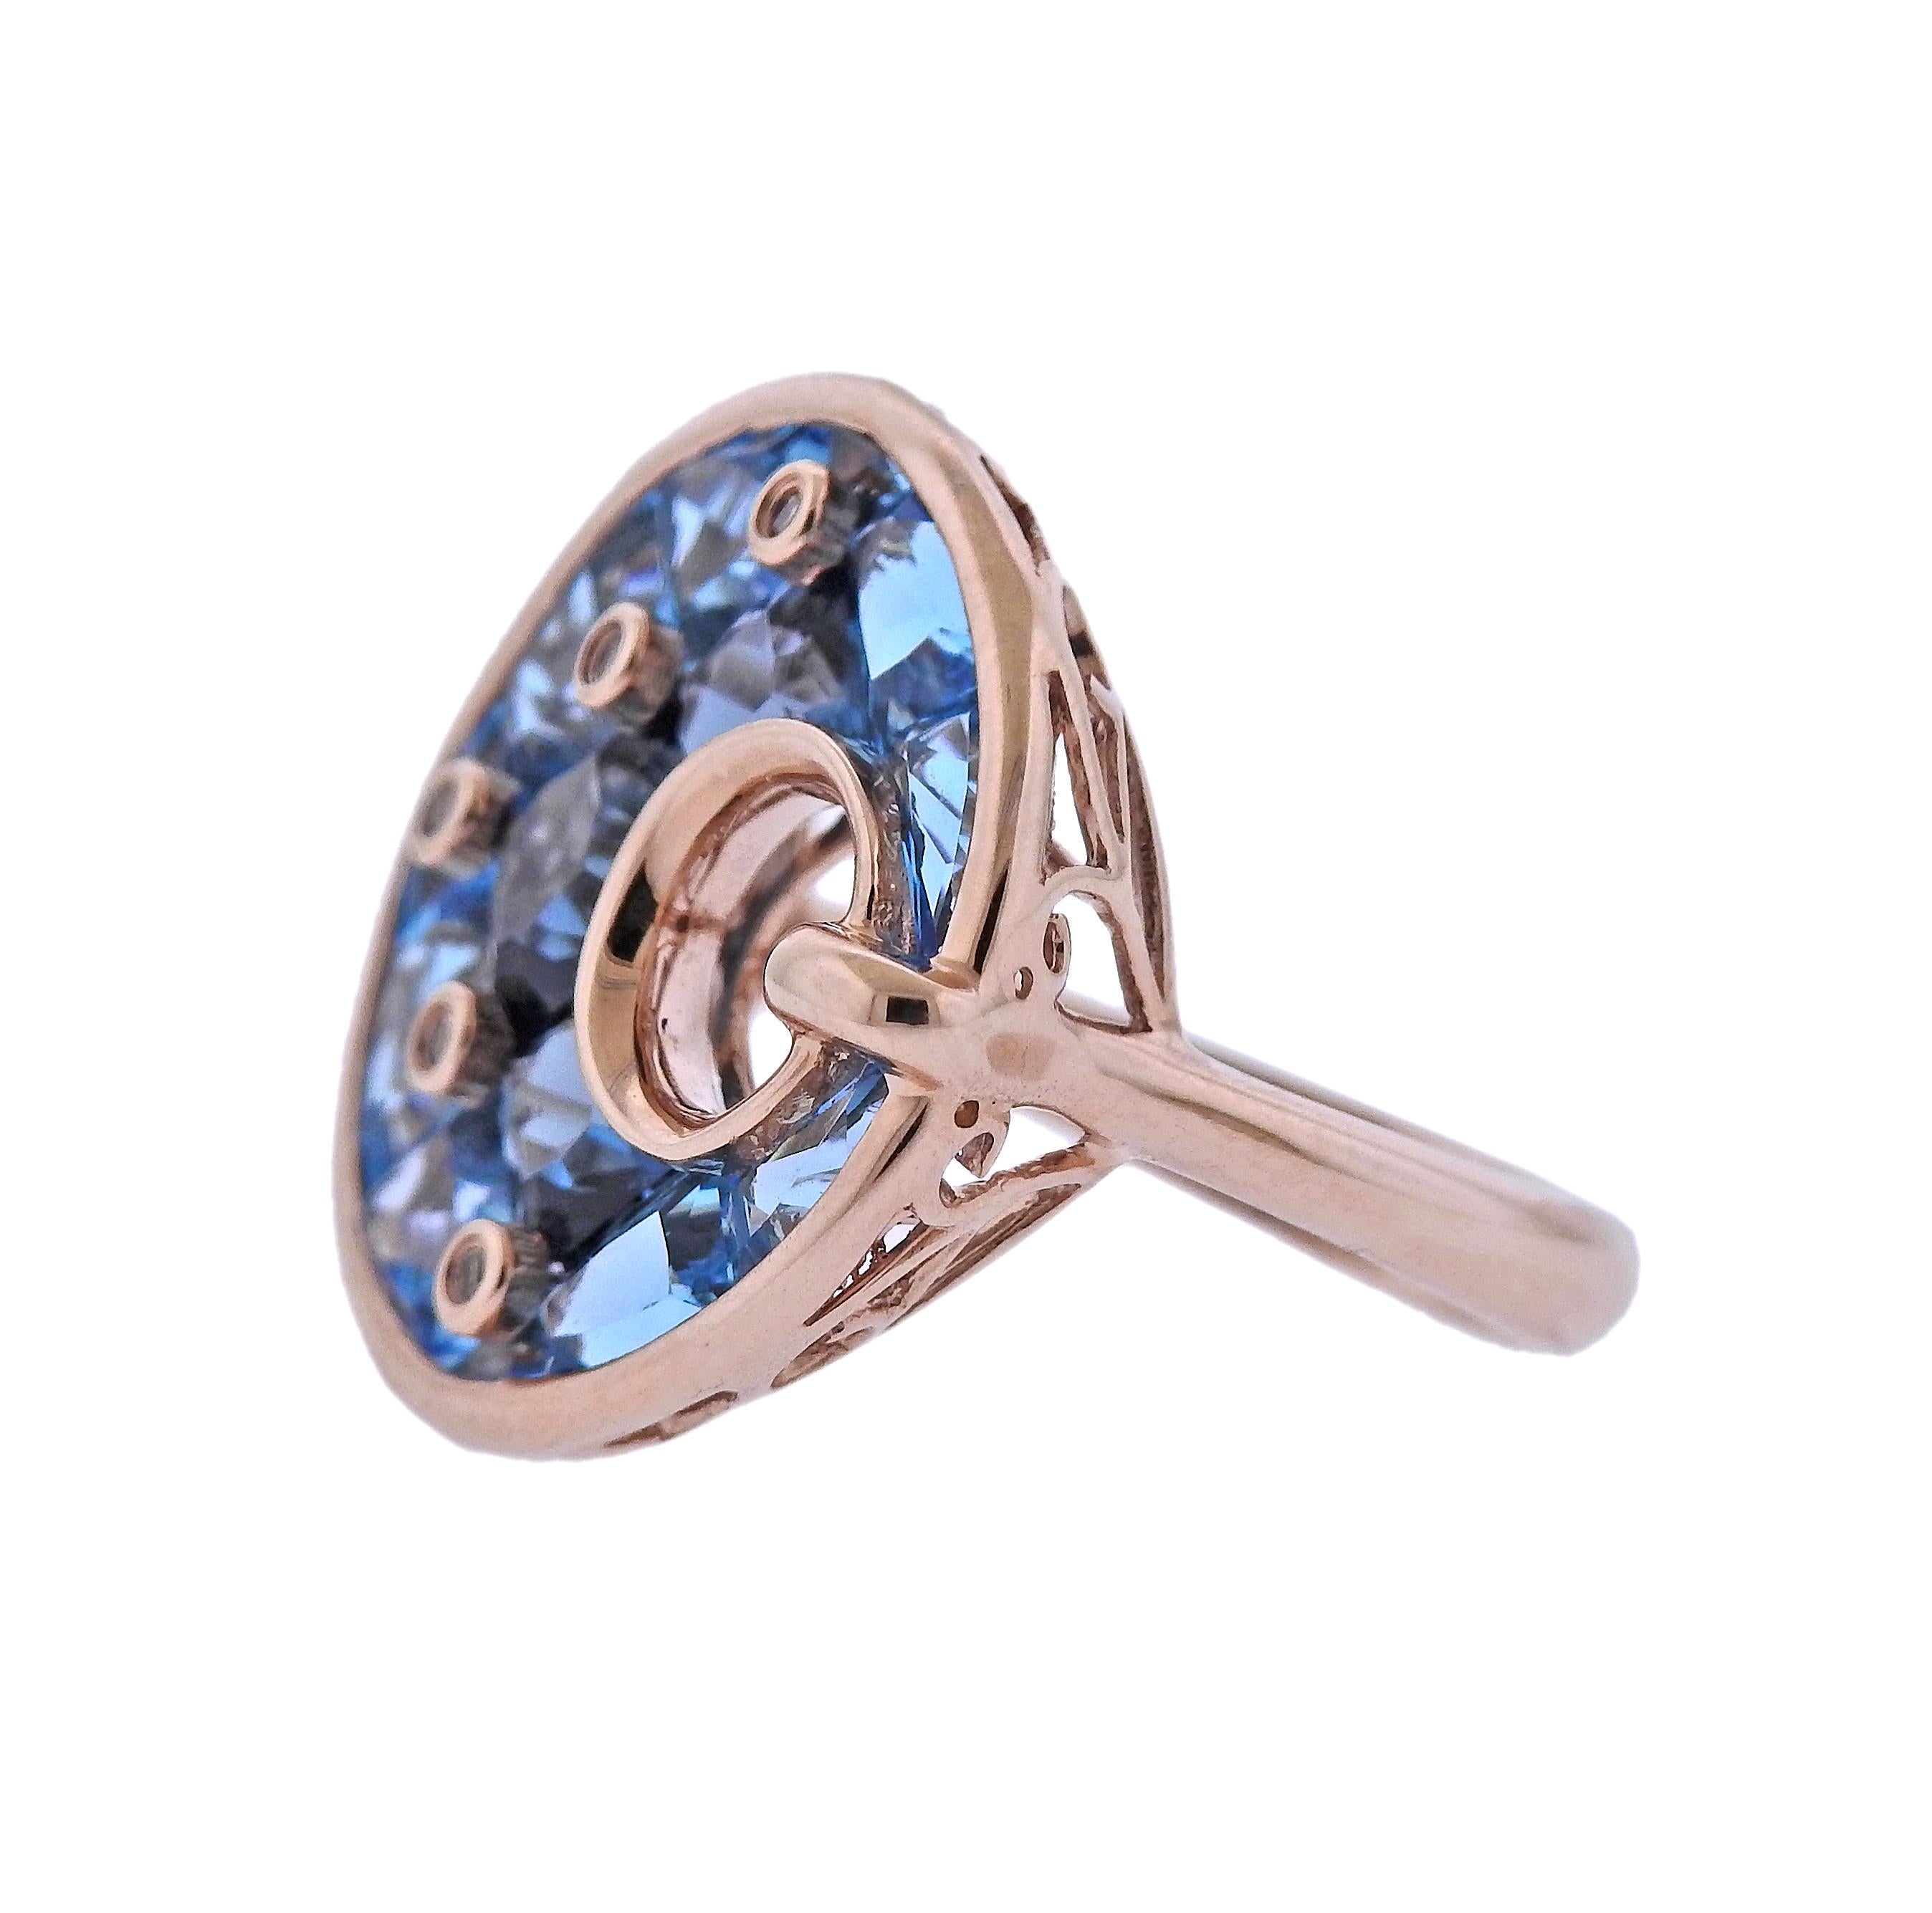 Featuring 14k rose gold ring from Hava Nouveau collection, set with 0.05ctw in H/VS diamonds and 8.35ctw in blue topaz. All Bellarri jewelry is brand new with tags. Ring Size - 7, 22mm in diameter. Weight - 7.8 grams. Marked Bellarri 14k.